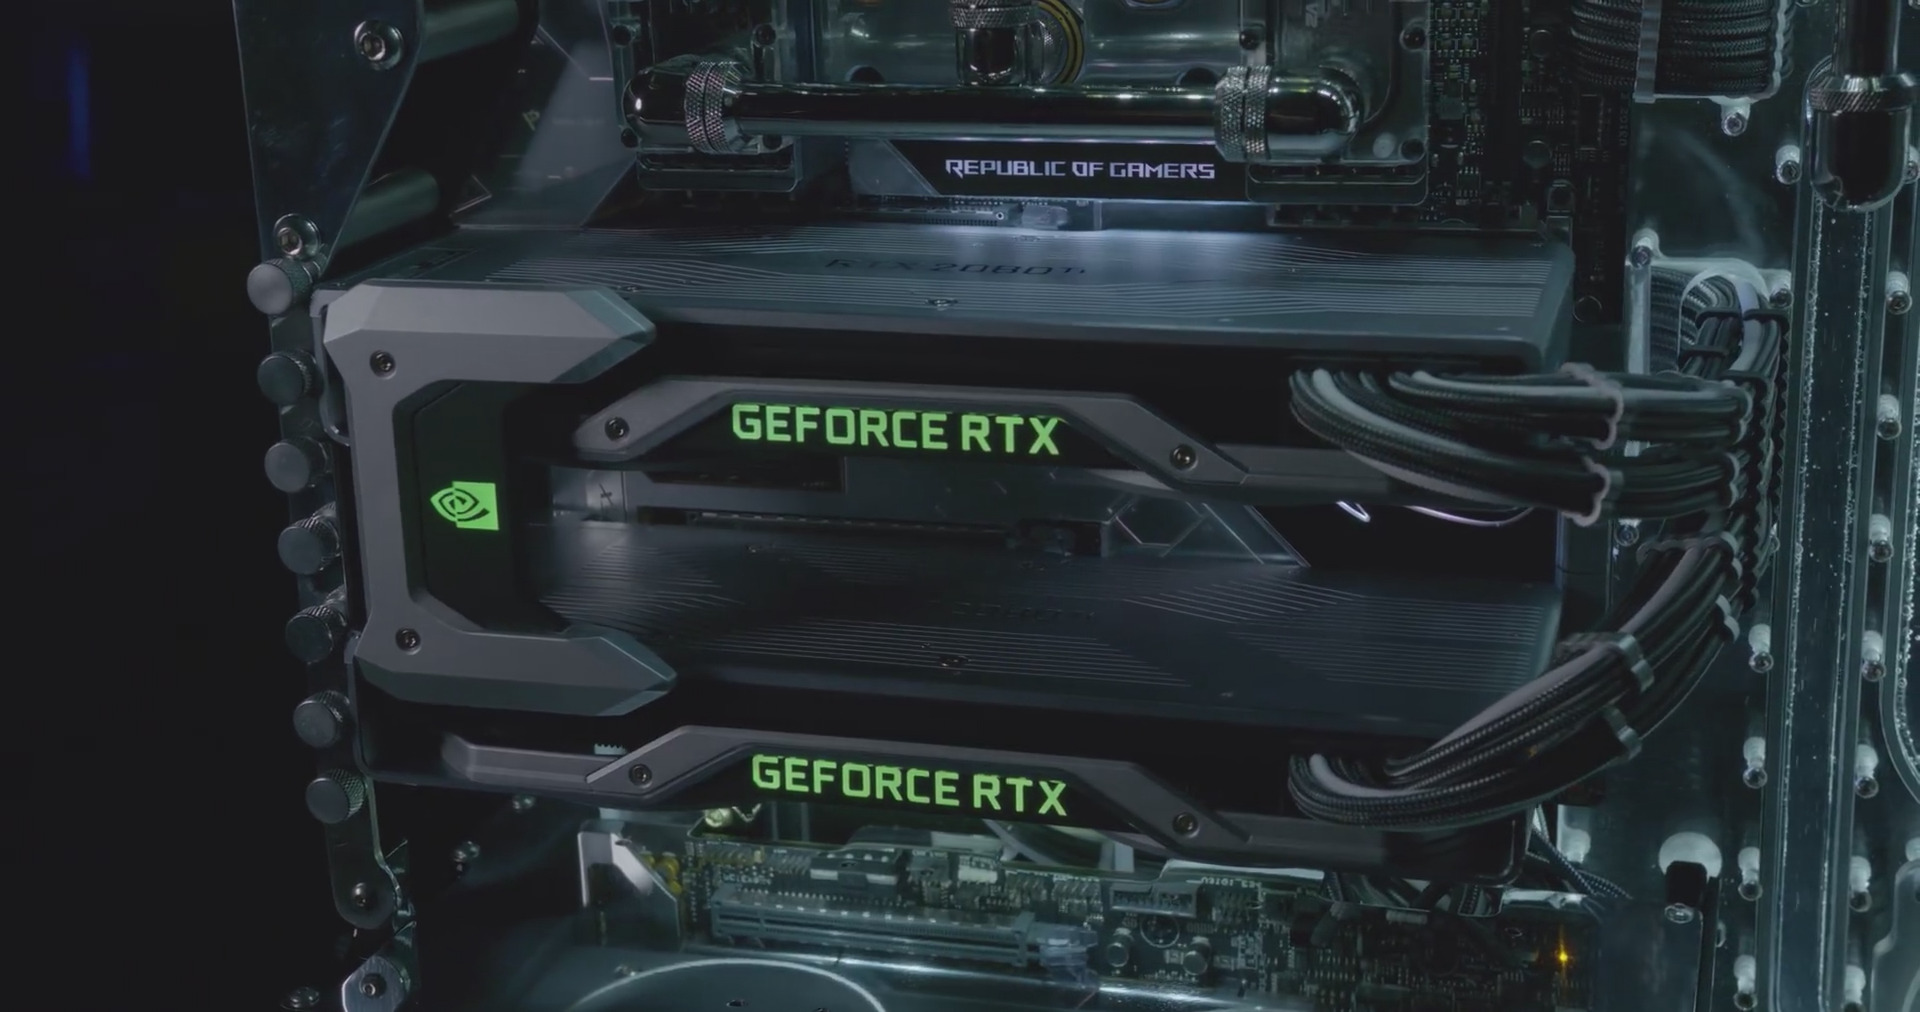 Media asset in full size related to 3dfxzone.it news item entitled as follows: GeForce Garage: ecco il primo PC modded con due GeForce RTX 2080 Ti | Image Name: news28630_GeForce-Garage-Turing-L3p-Spectre-feat-GeForce-RTX-2080-Ti_2.jpg